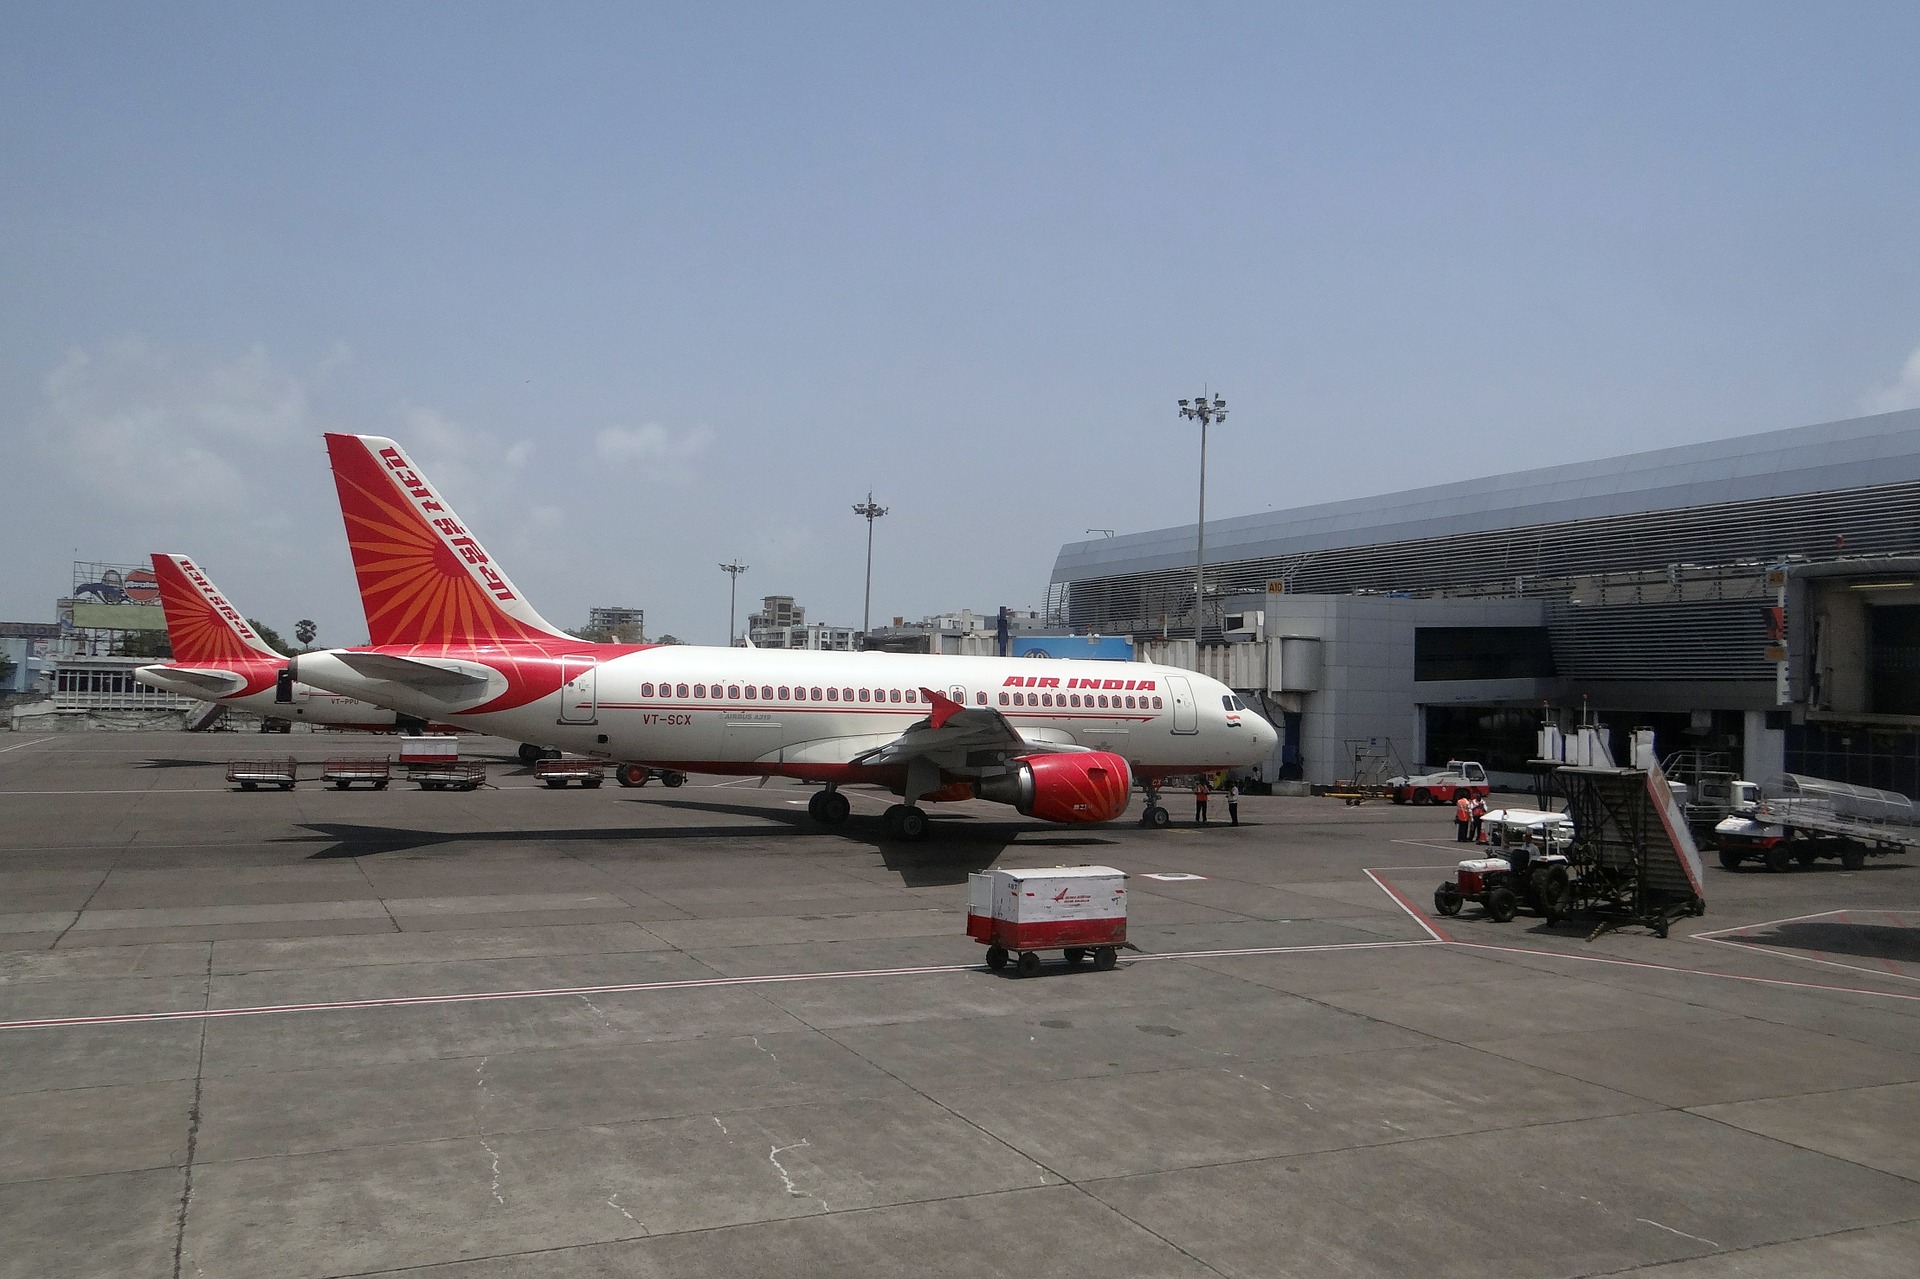 Two Air India's, India's aviation history's first commercial airline's aircraft stationed at an airport.